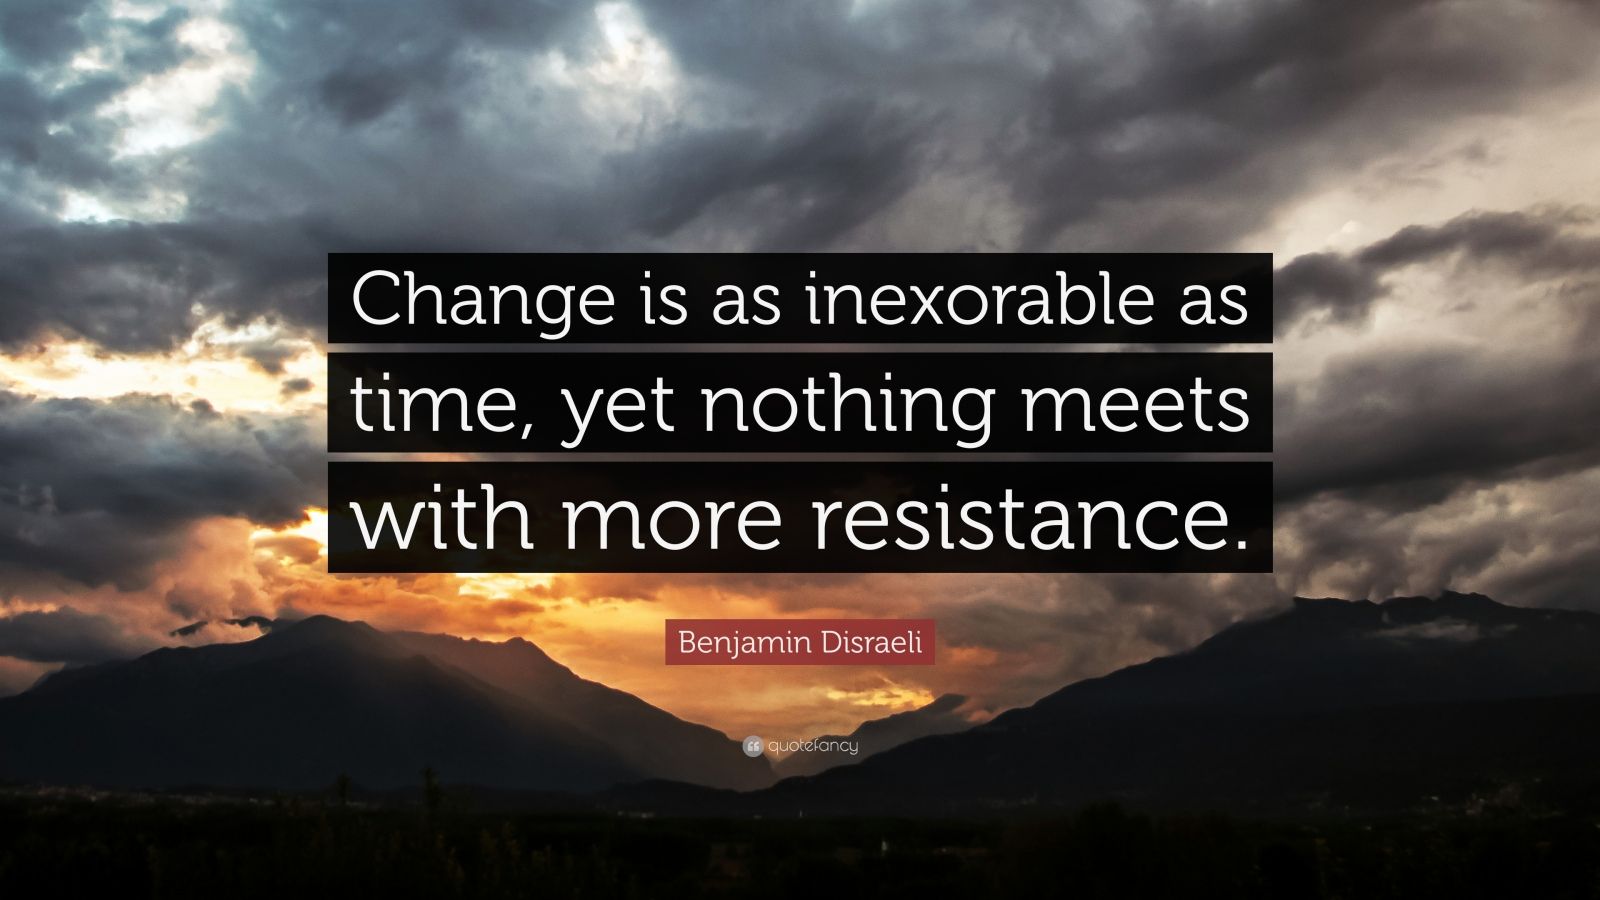 Benjamin Disraeli Quote: “Change is as inexorable as time, yet nothing